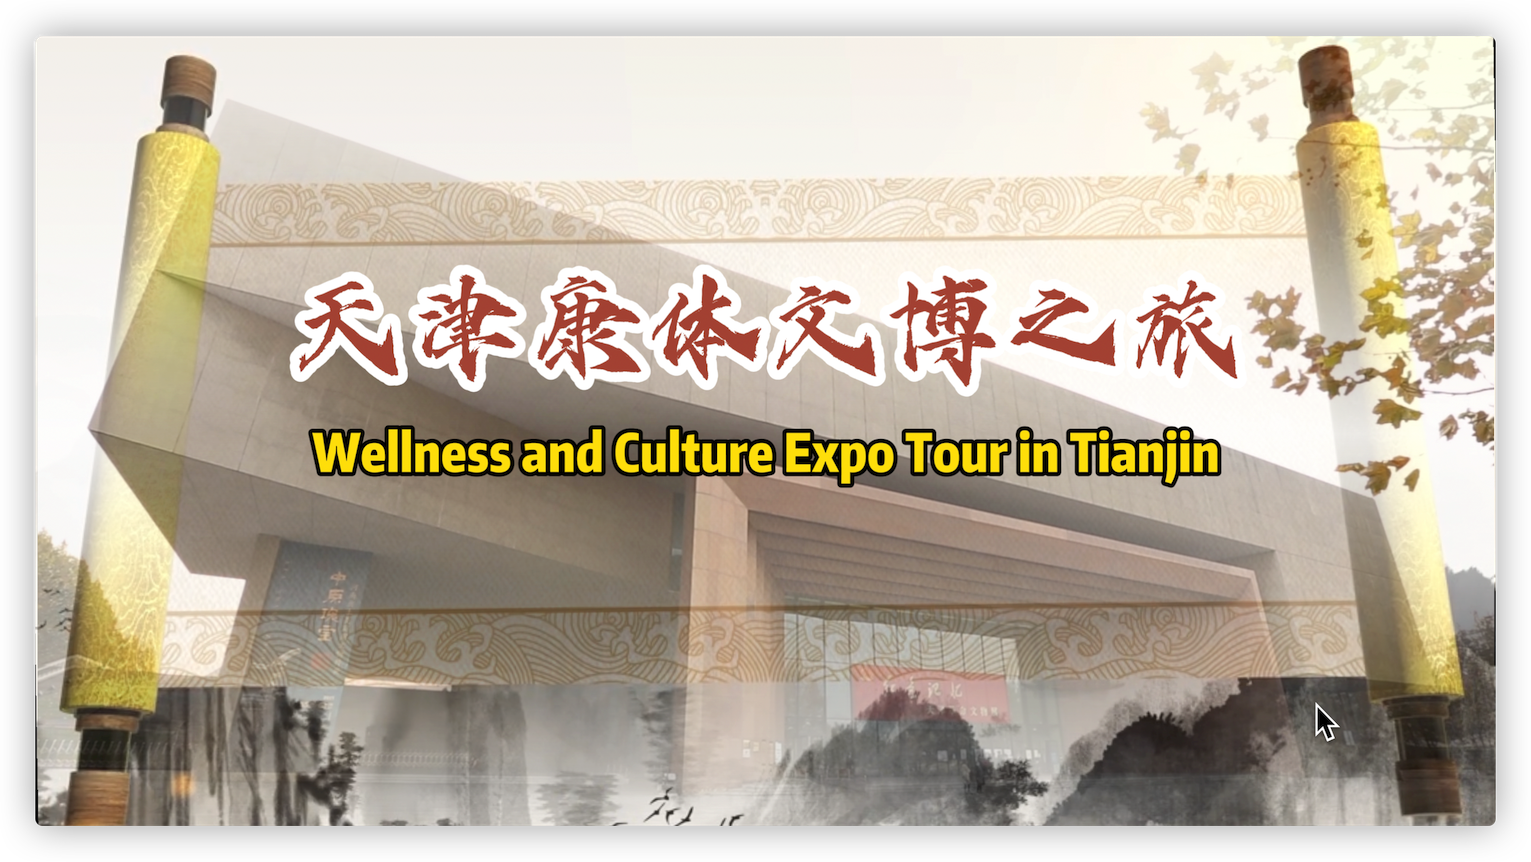 Wellness and Culture Expo Tour in Tianjin